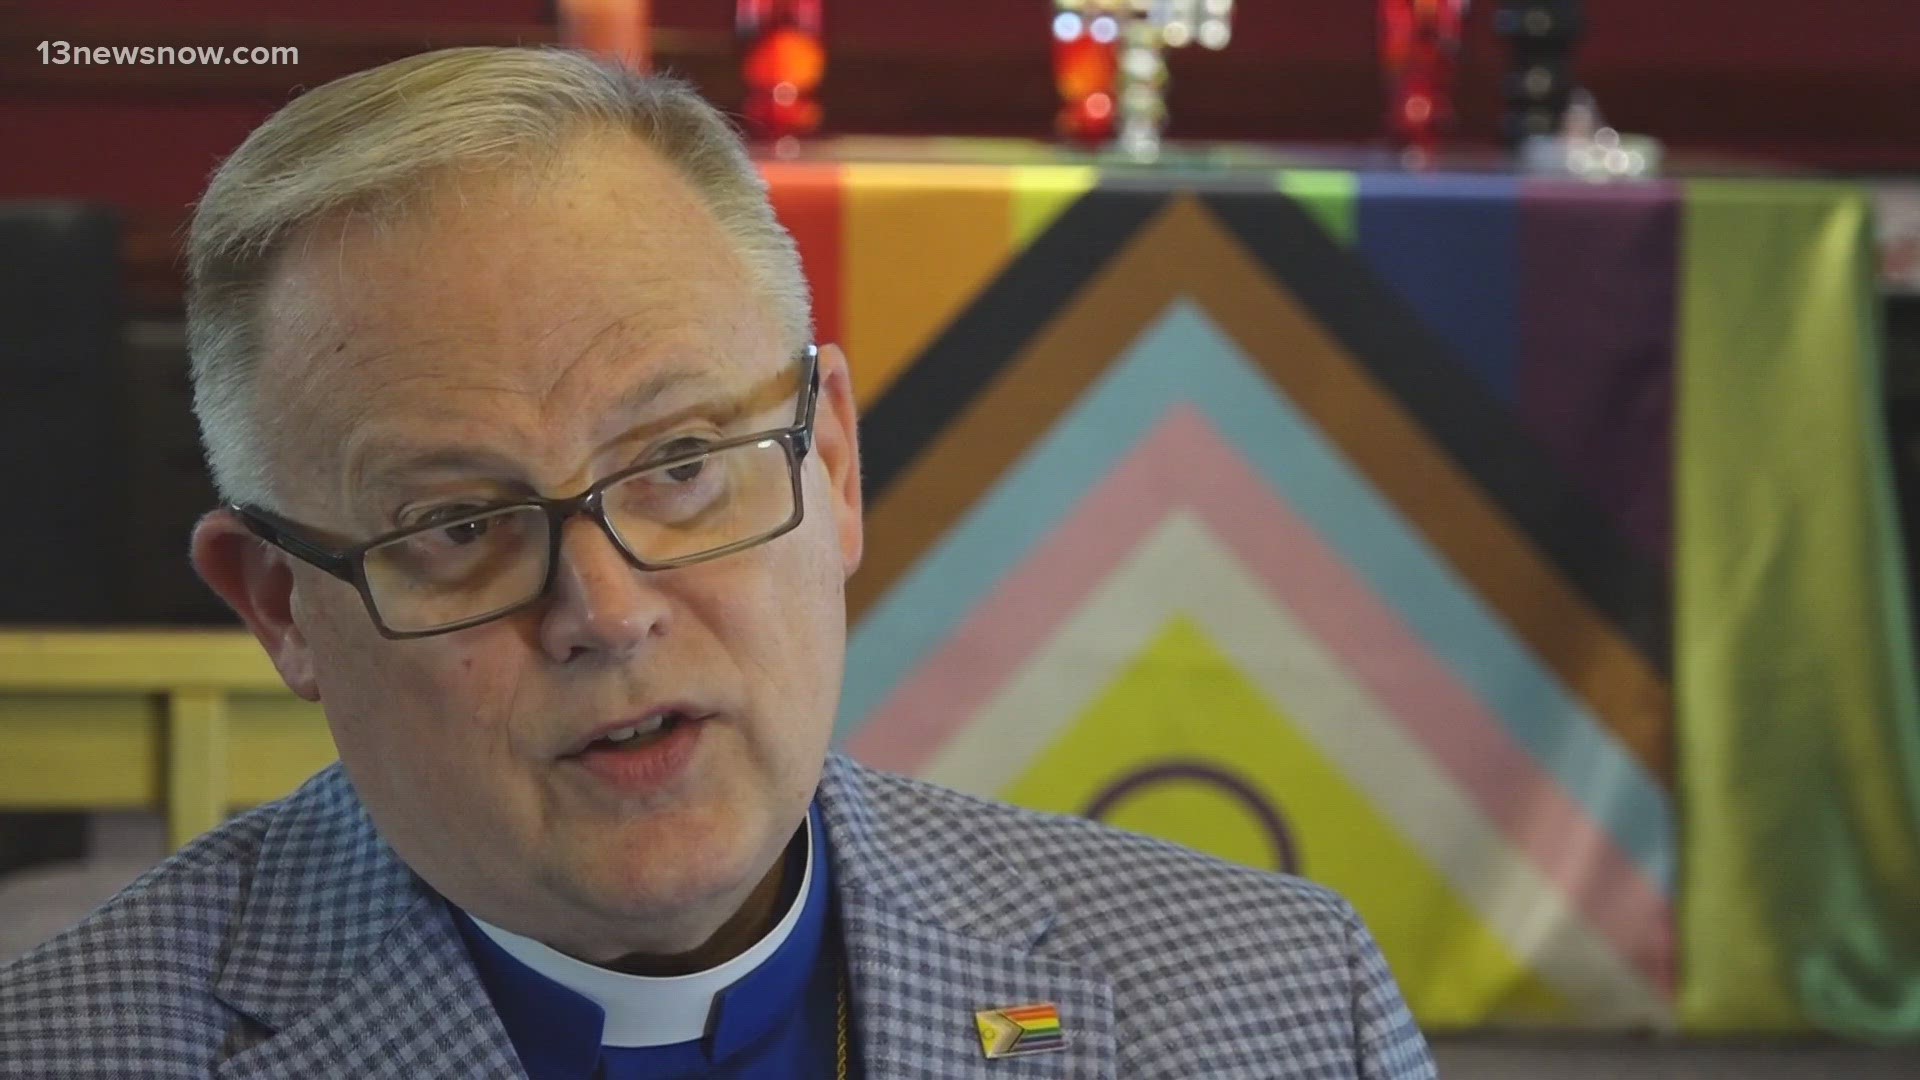 June is Pride month and local faith leaders share why -- and how -- they're preparing to call out hate against the LGBT+ community.